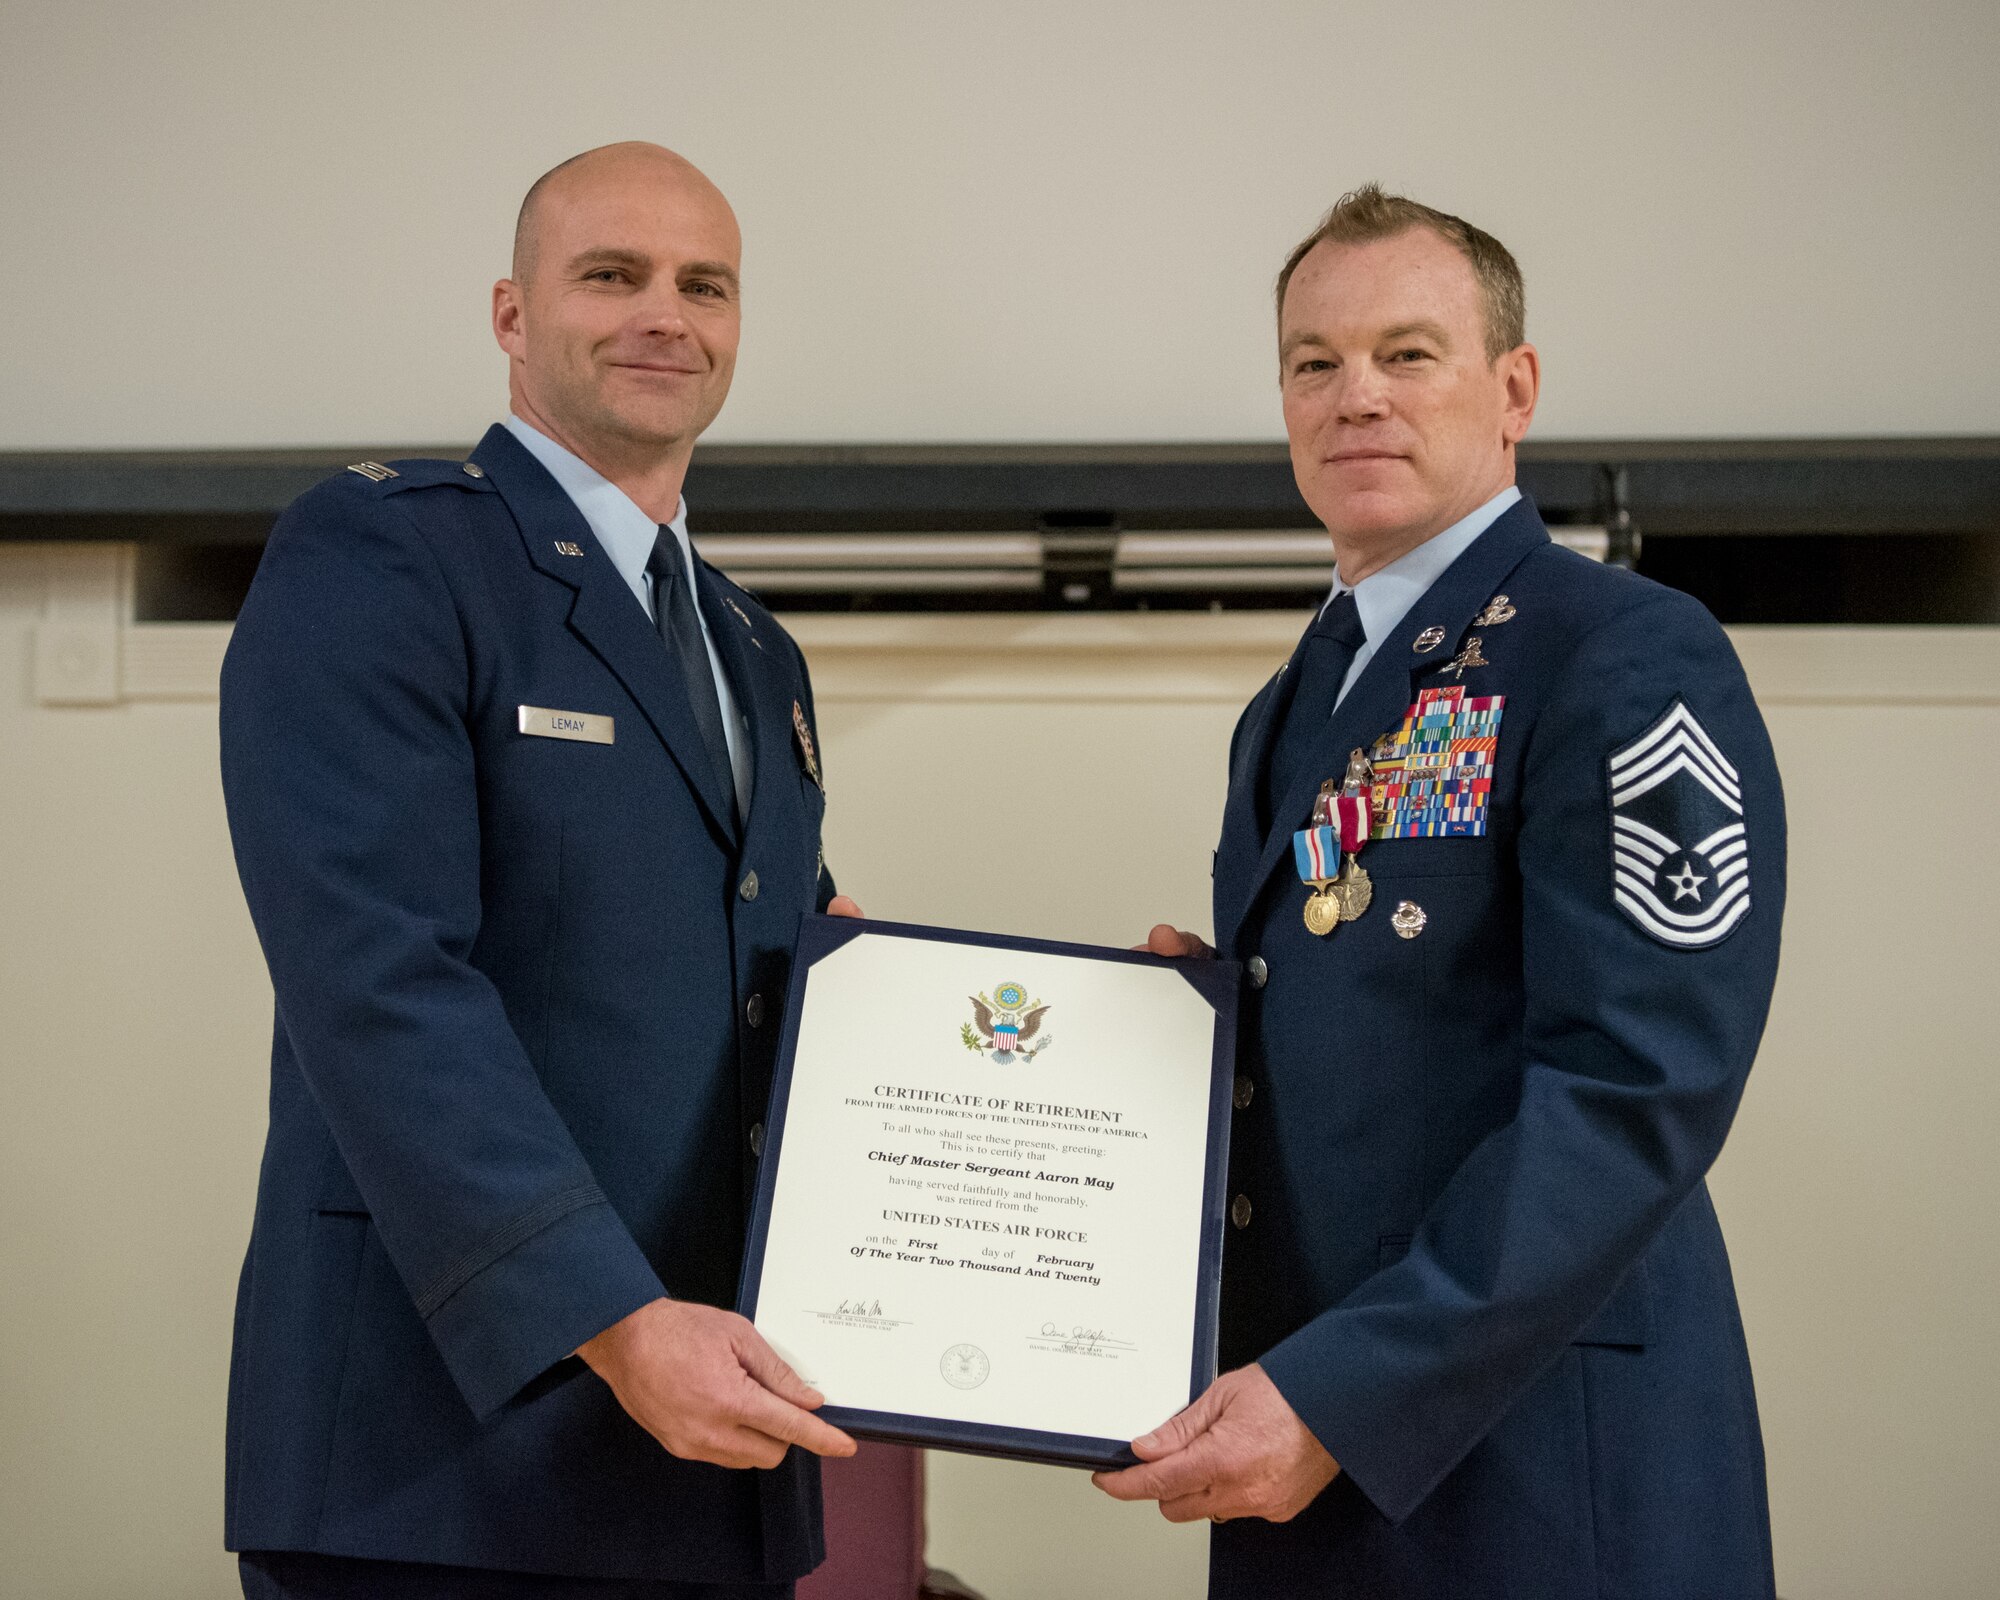 Chief Master Sgt. Aaron May (right), the outgoing chief enlisted manager for the 123rd Special Tactics Squadron, receives his certificate of retirement from Capt. Russ LeMay, Norse Troop officer in charge for the 123rd Special Tactics Squadron, during May’s retirement ceremony at the Kentucky Air National Guard Base in Louisville, Ky., on Dec. 7, 2019. May is retiring after more than 26 years of service to the Kentucky Air National Guard and U.S. Air Force. (U.S. Air National Guard photo by Staff Sgt. Joshua Horton)